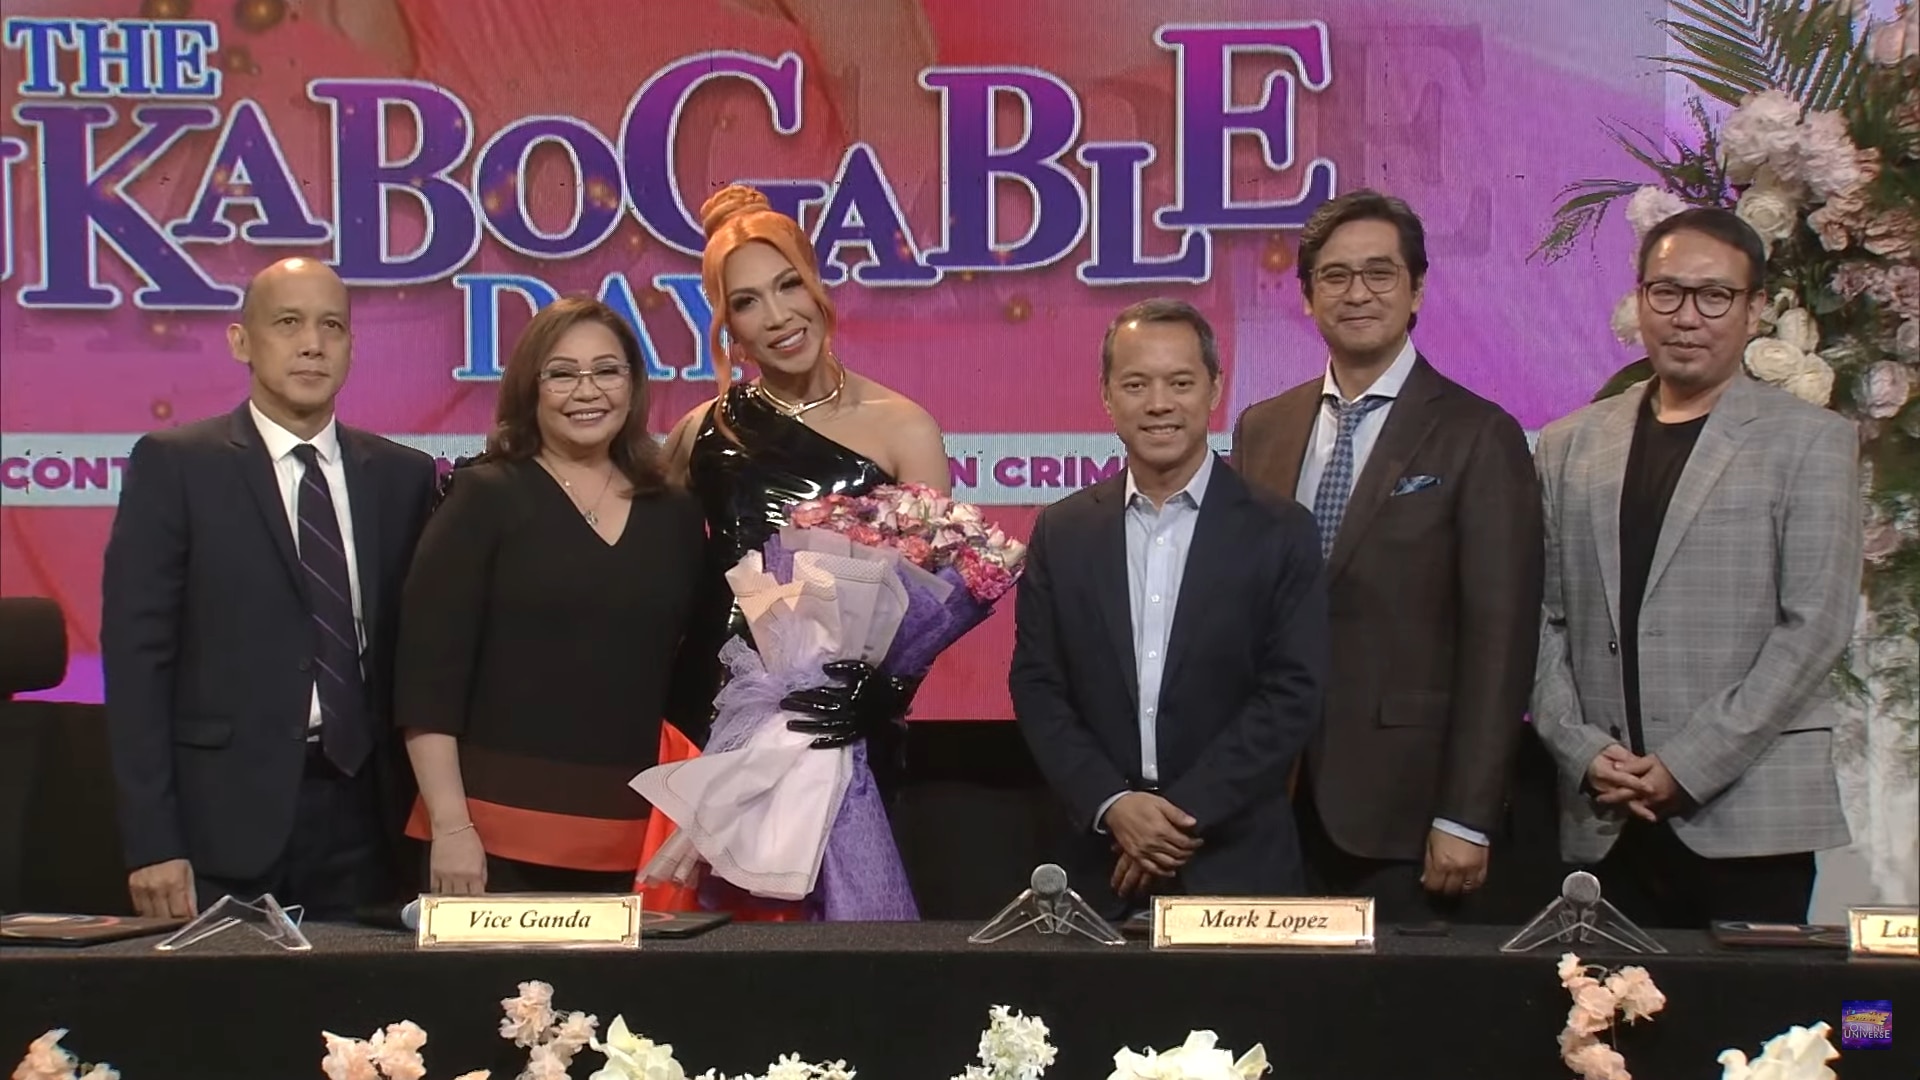 VICE GANDA WITH THE ABS CBN EXECUTIVES